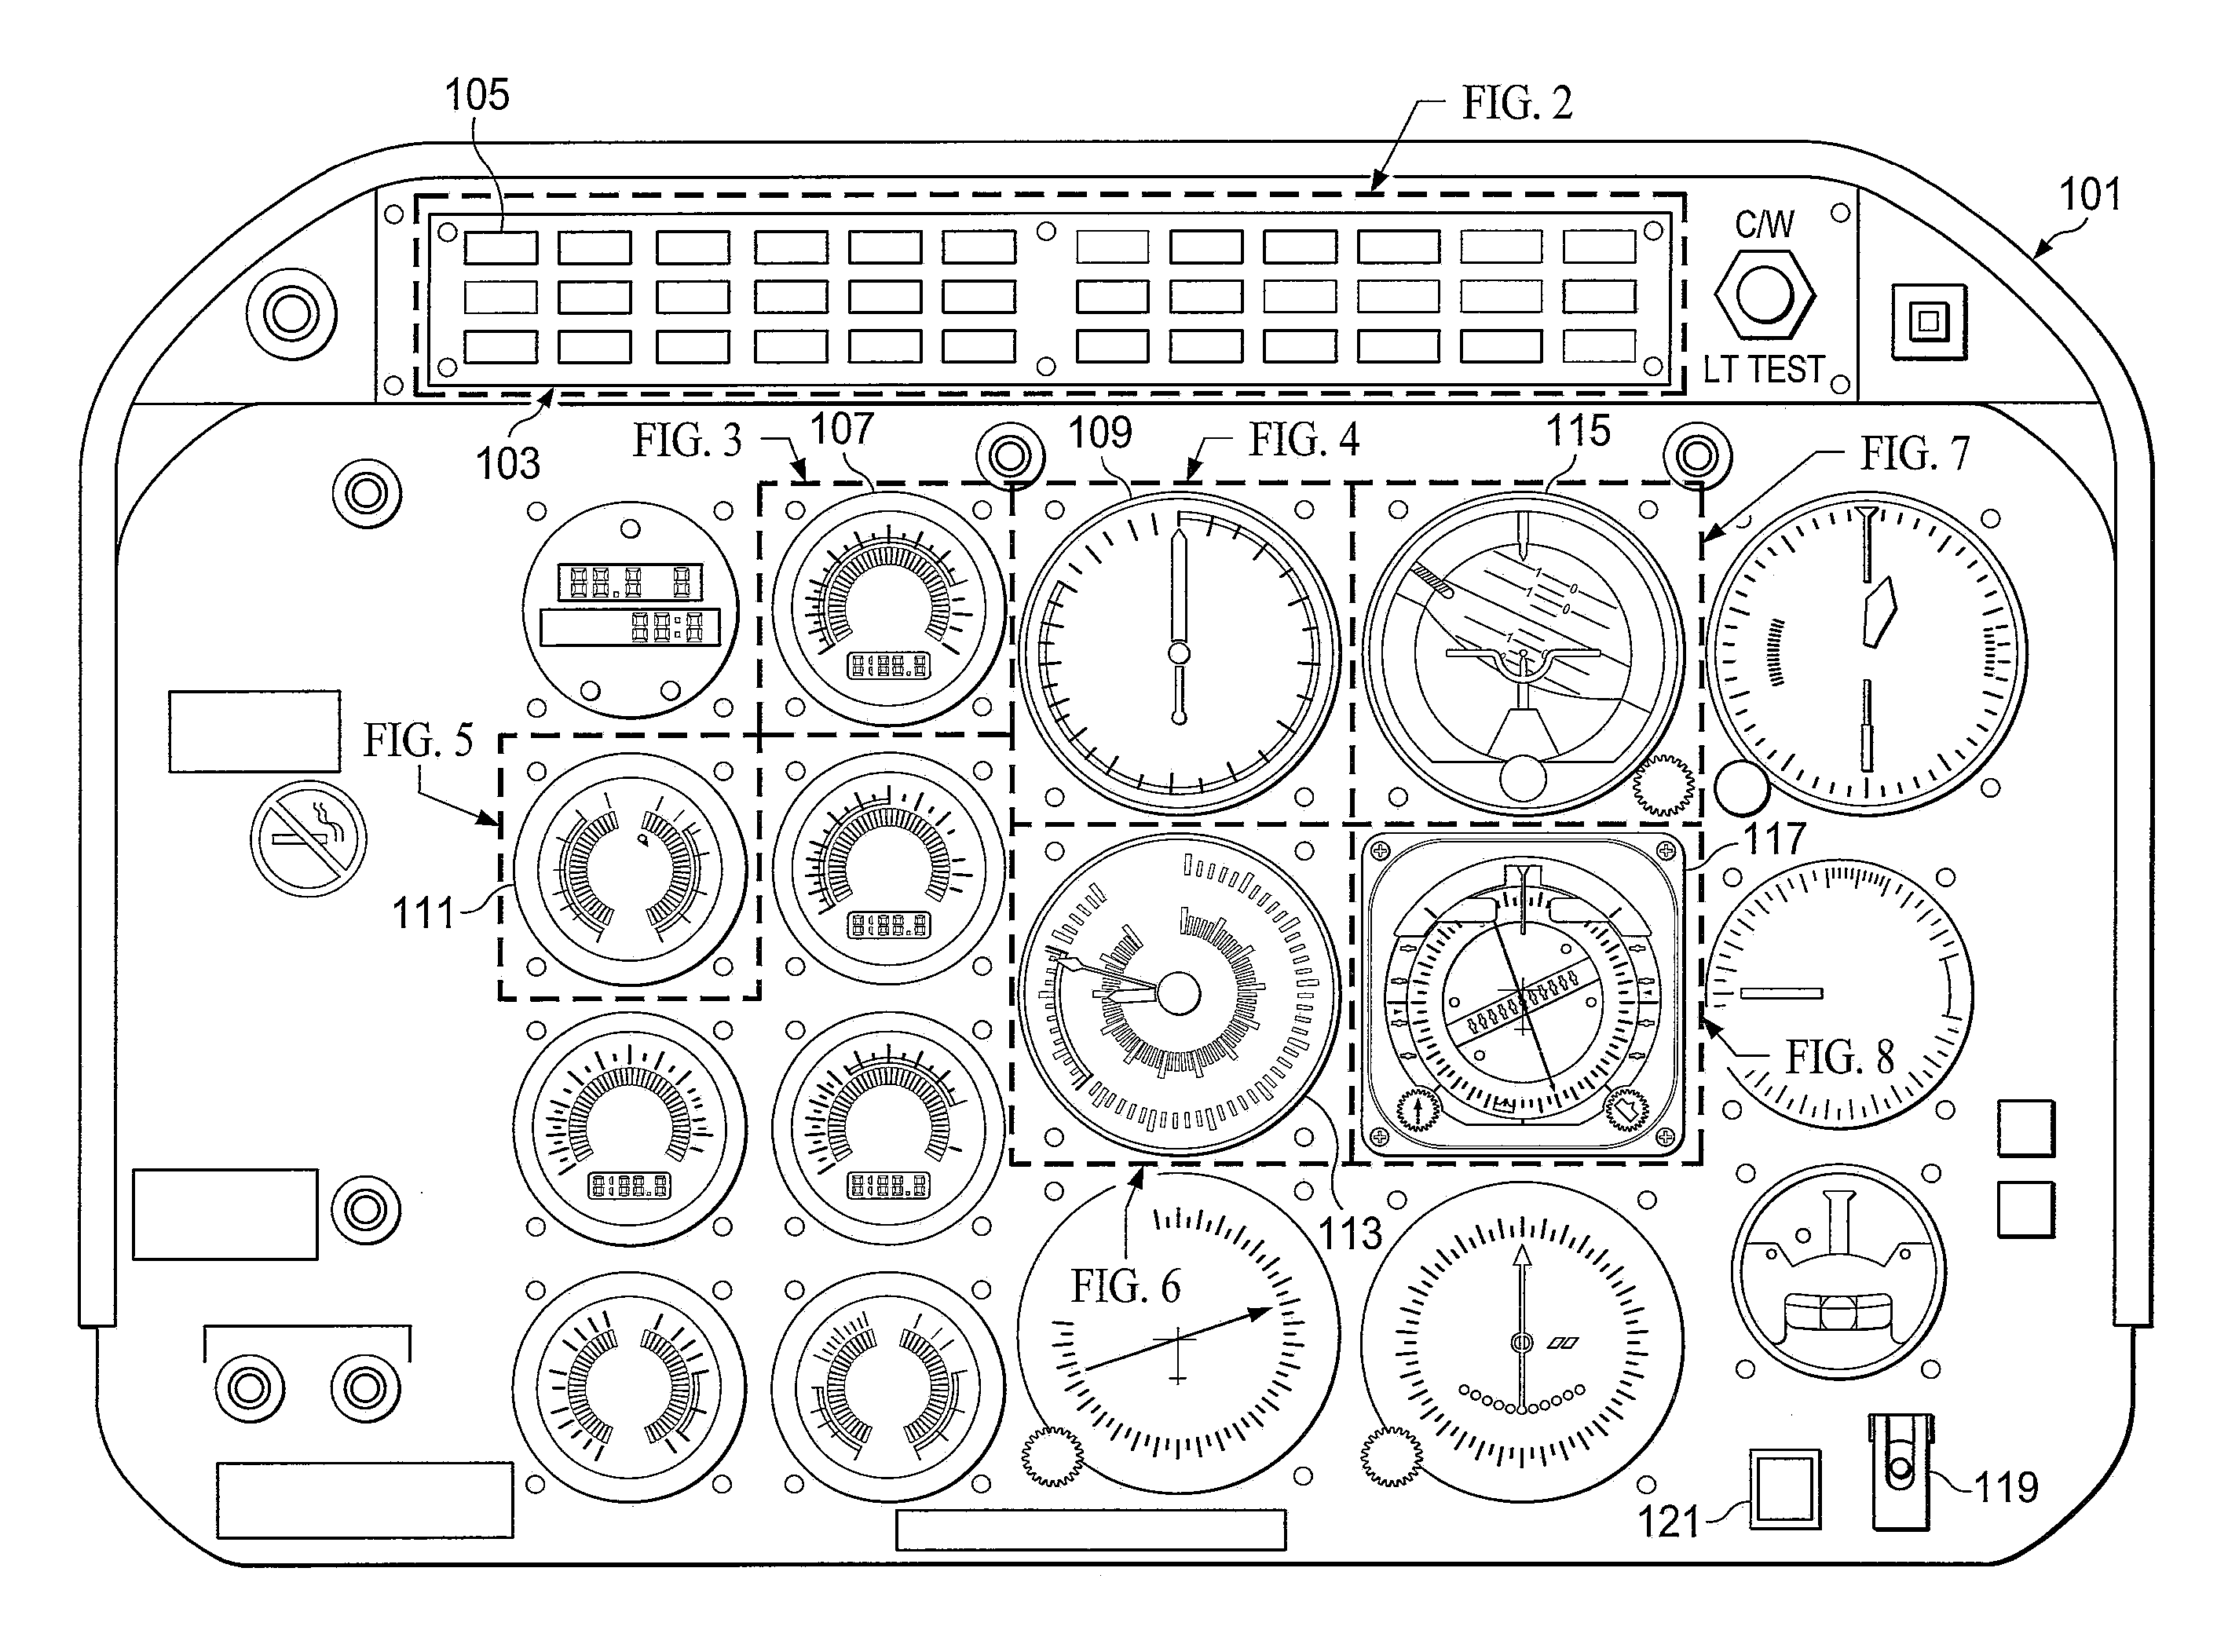 System for optical recognition, interpretation, and digitization of human readable instruments, annunciators, and controls